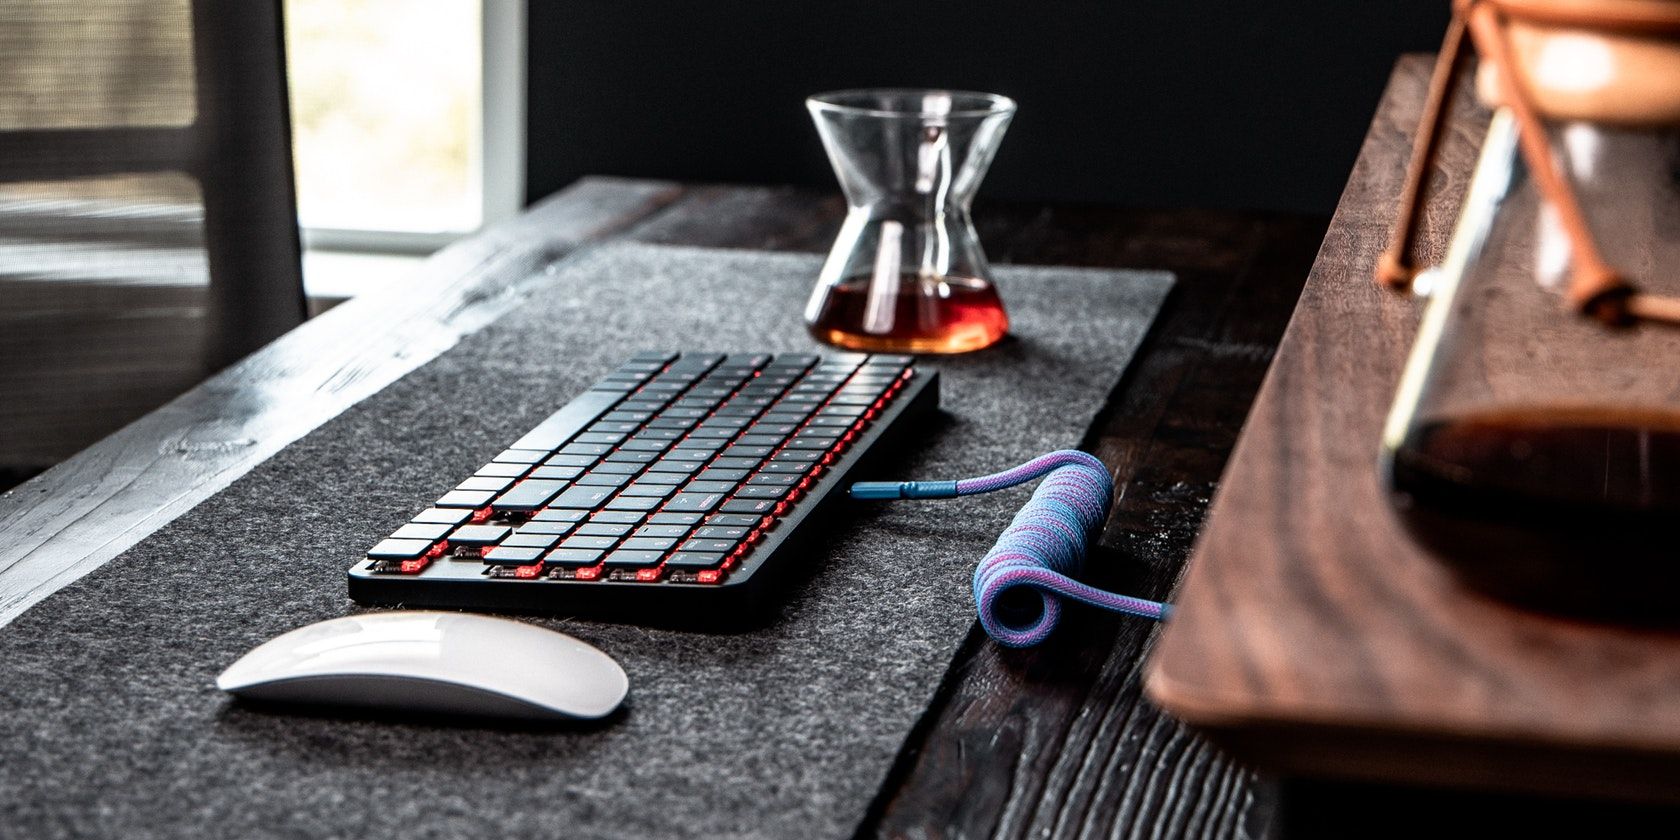 Keyboard and Mouse Placed on a Pad on Working Table